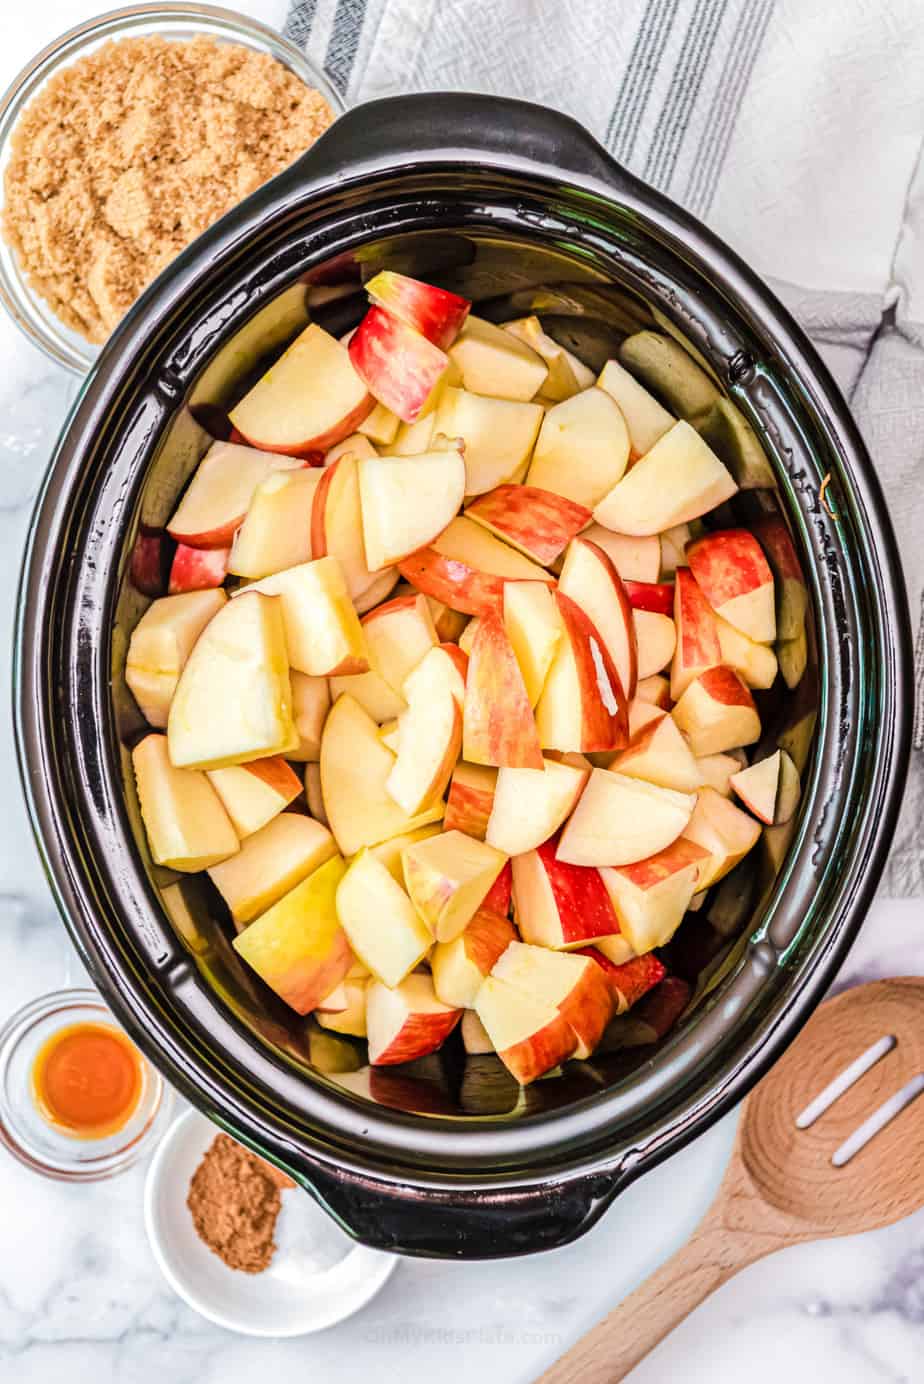 Sliced apples in a crockpot with other apple cutter ingredients in bowls nearby.